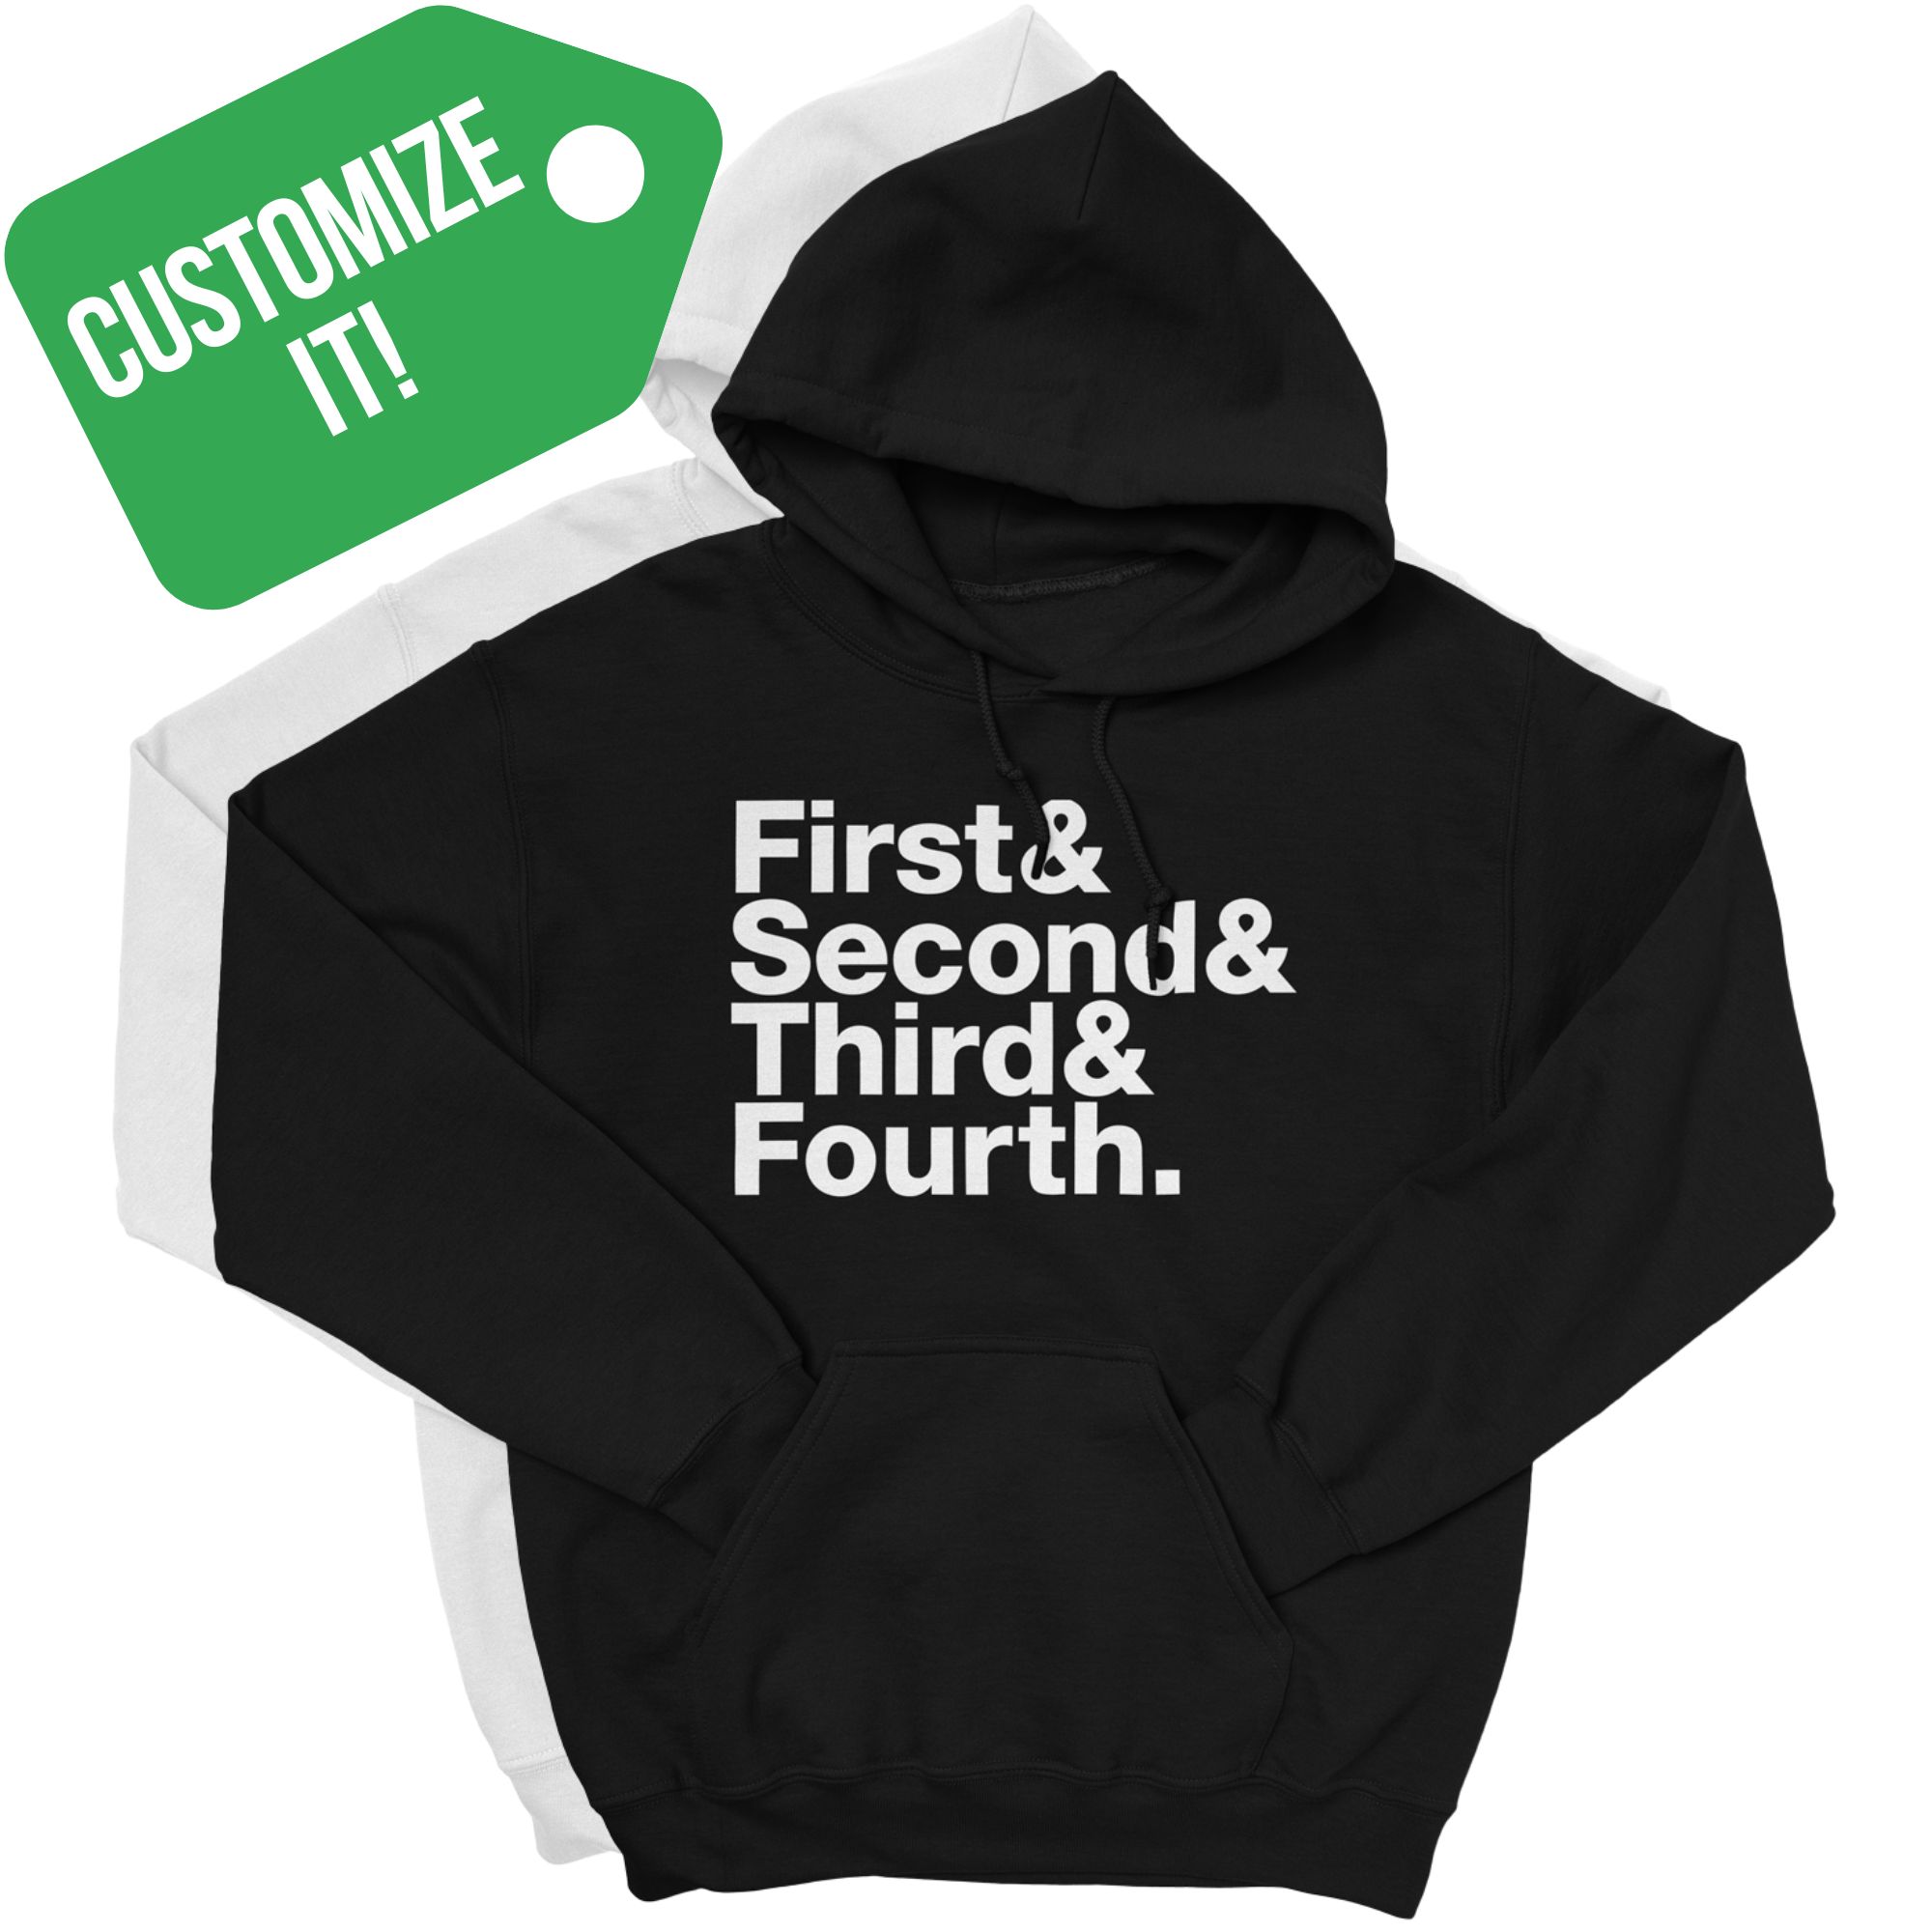 CUSTOMIZE IT! First& Second& Third& Fouth. black and white hoodies